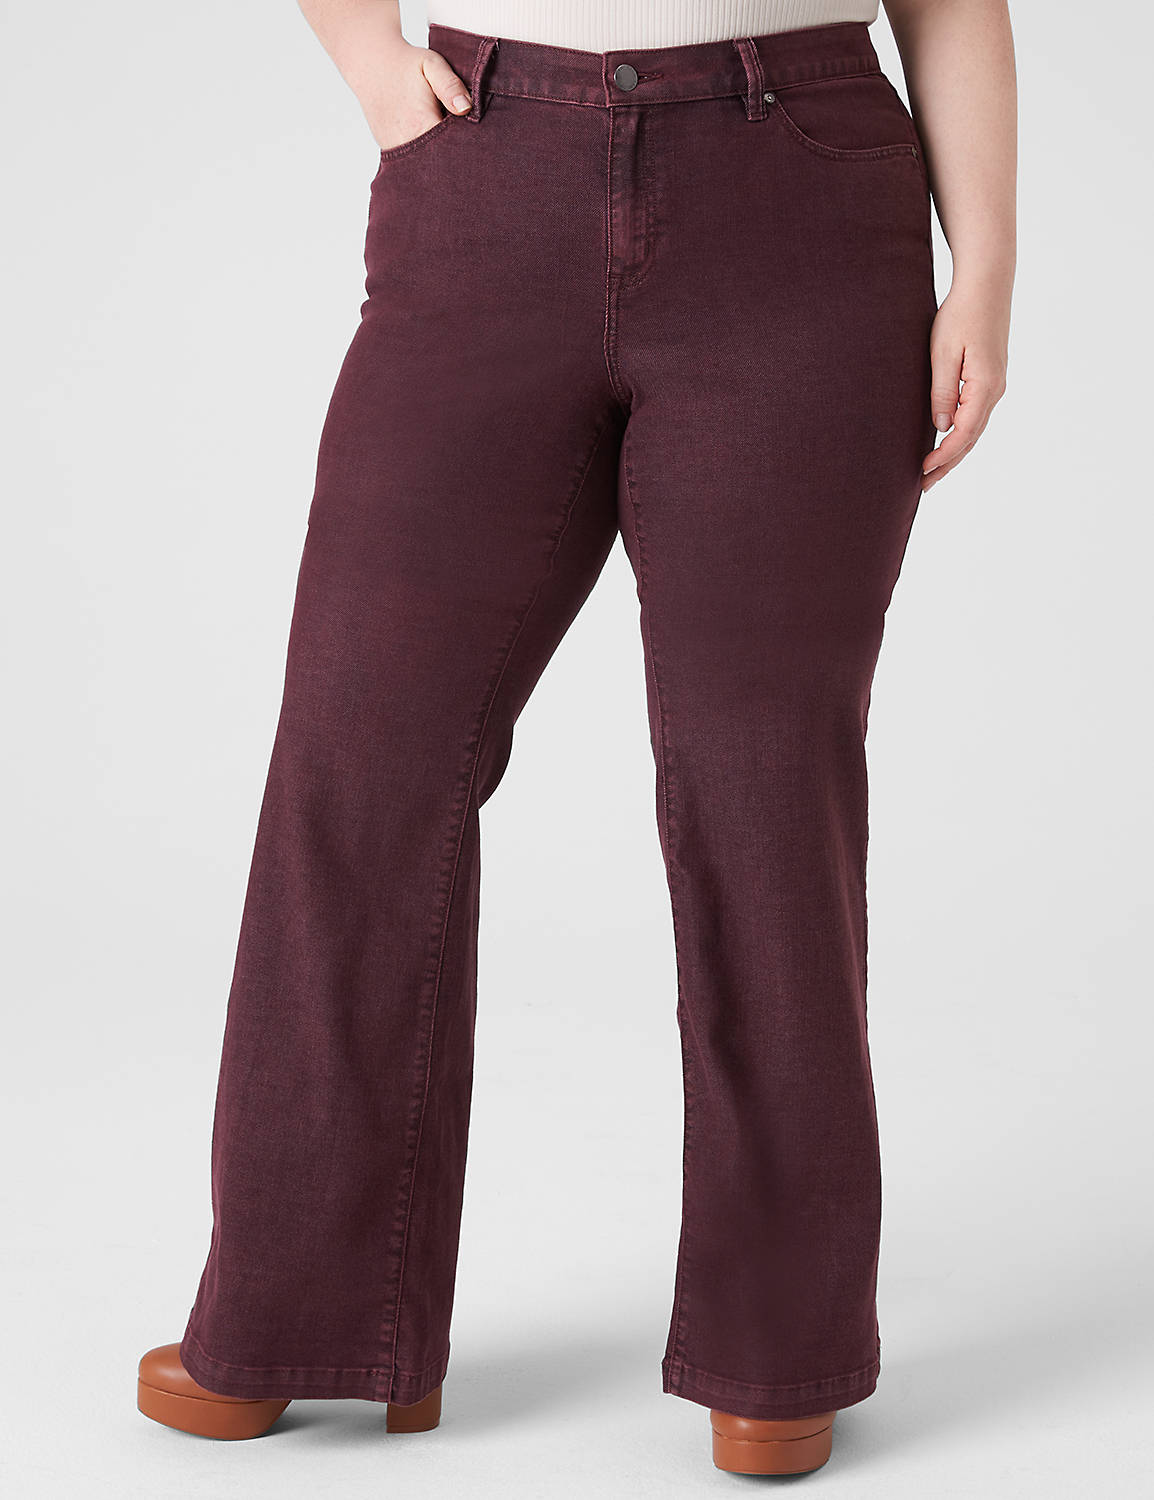 SIGNATURE FIT MID RISE FLARE JEAN Product Image 1